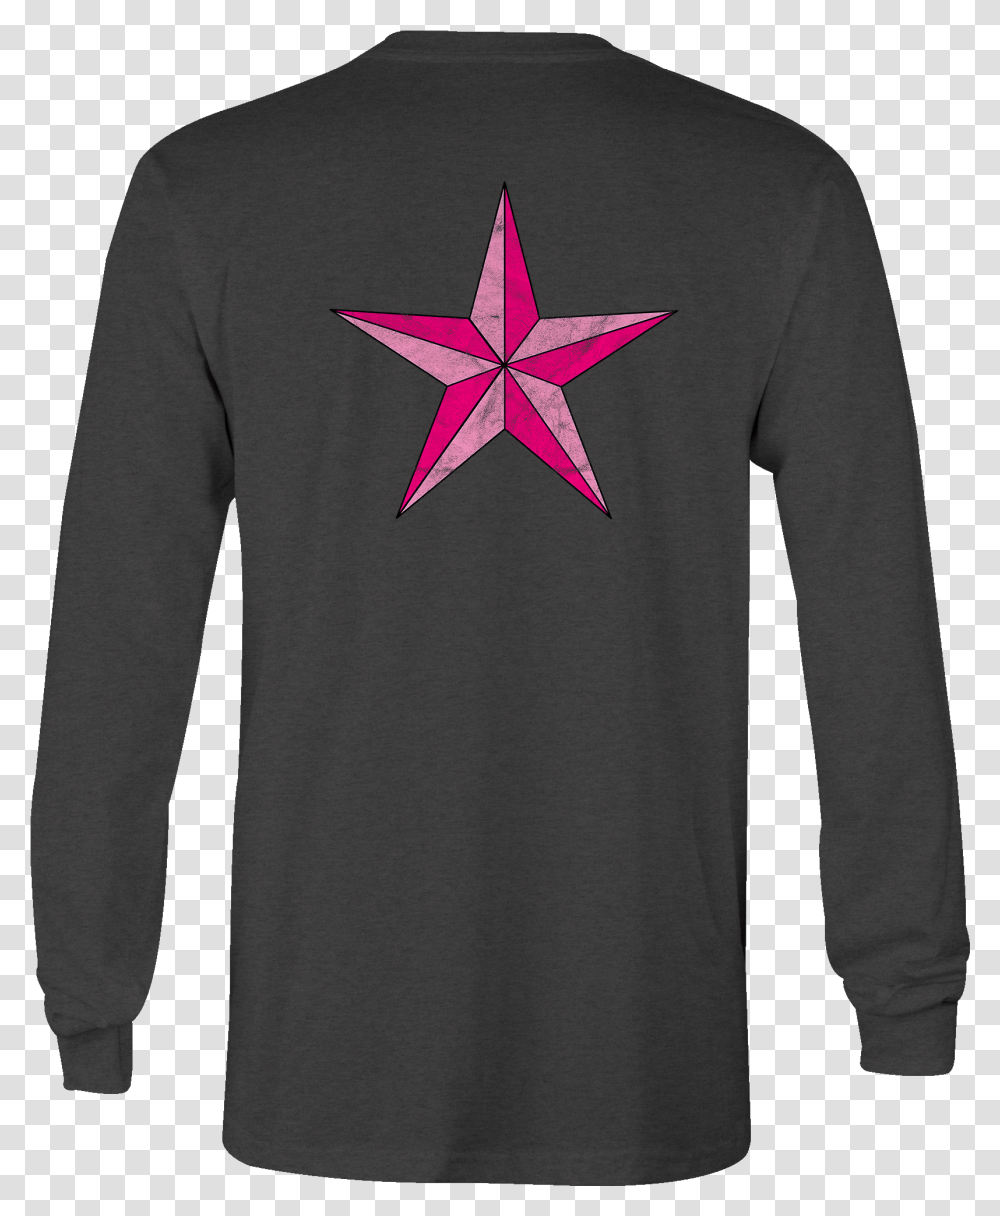 Details About Long Sleeve Tshirt Pink Nautical Star For Women, Clothing, Apparel, Symbol, Star Symbol Transparent Png